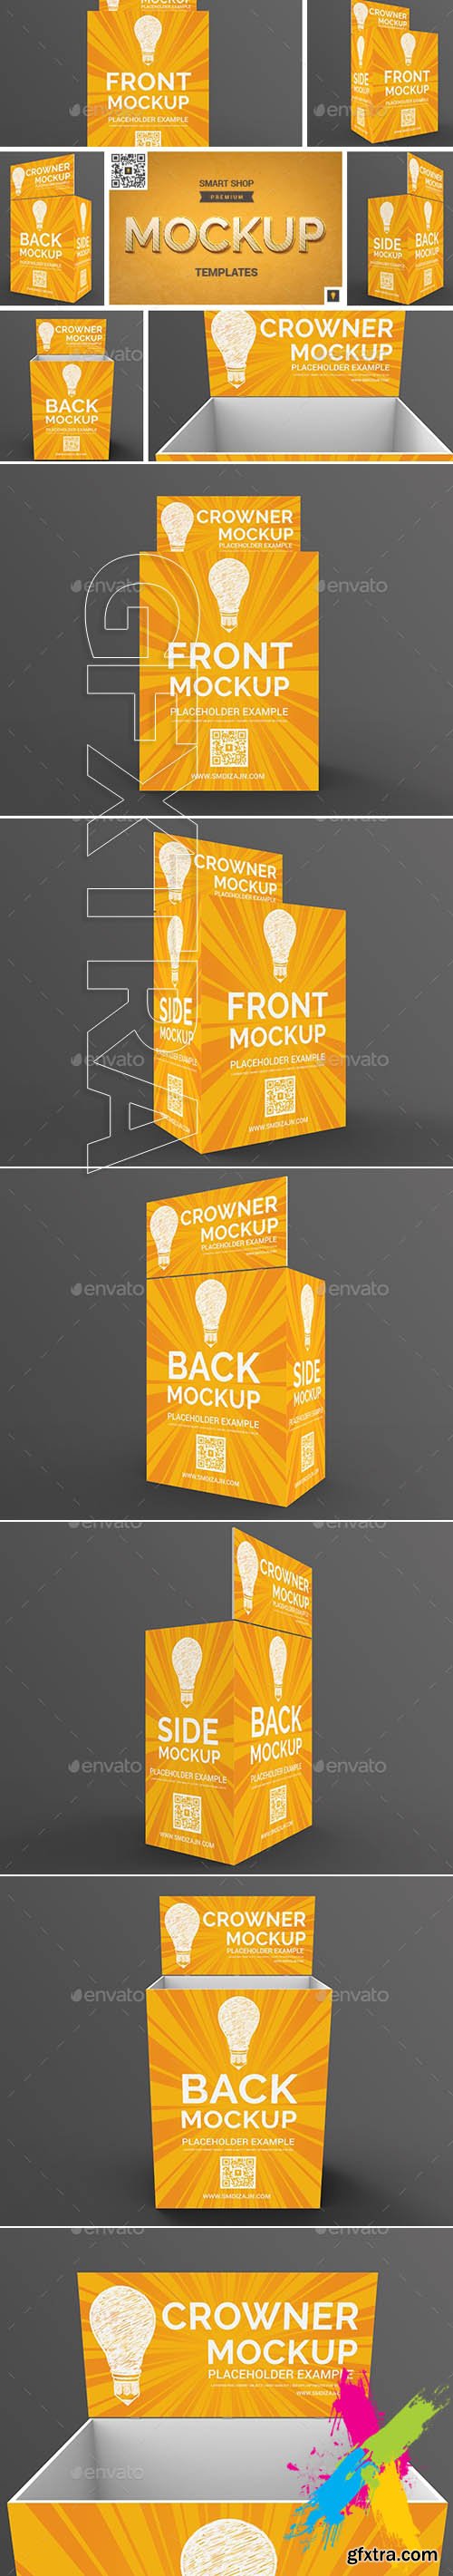 Graphicriver - Store Palette with Crowner Mockup 20274483